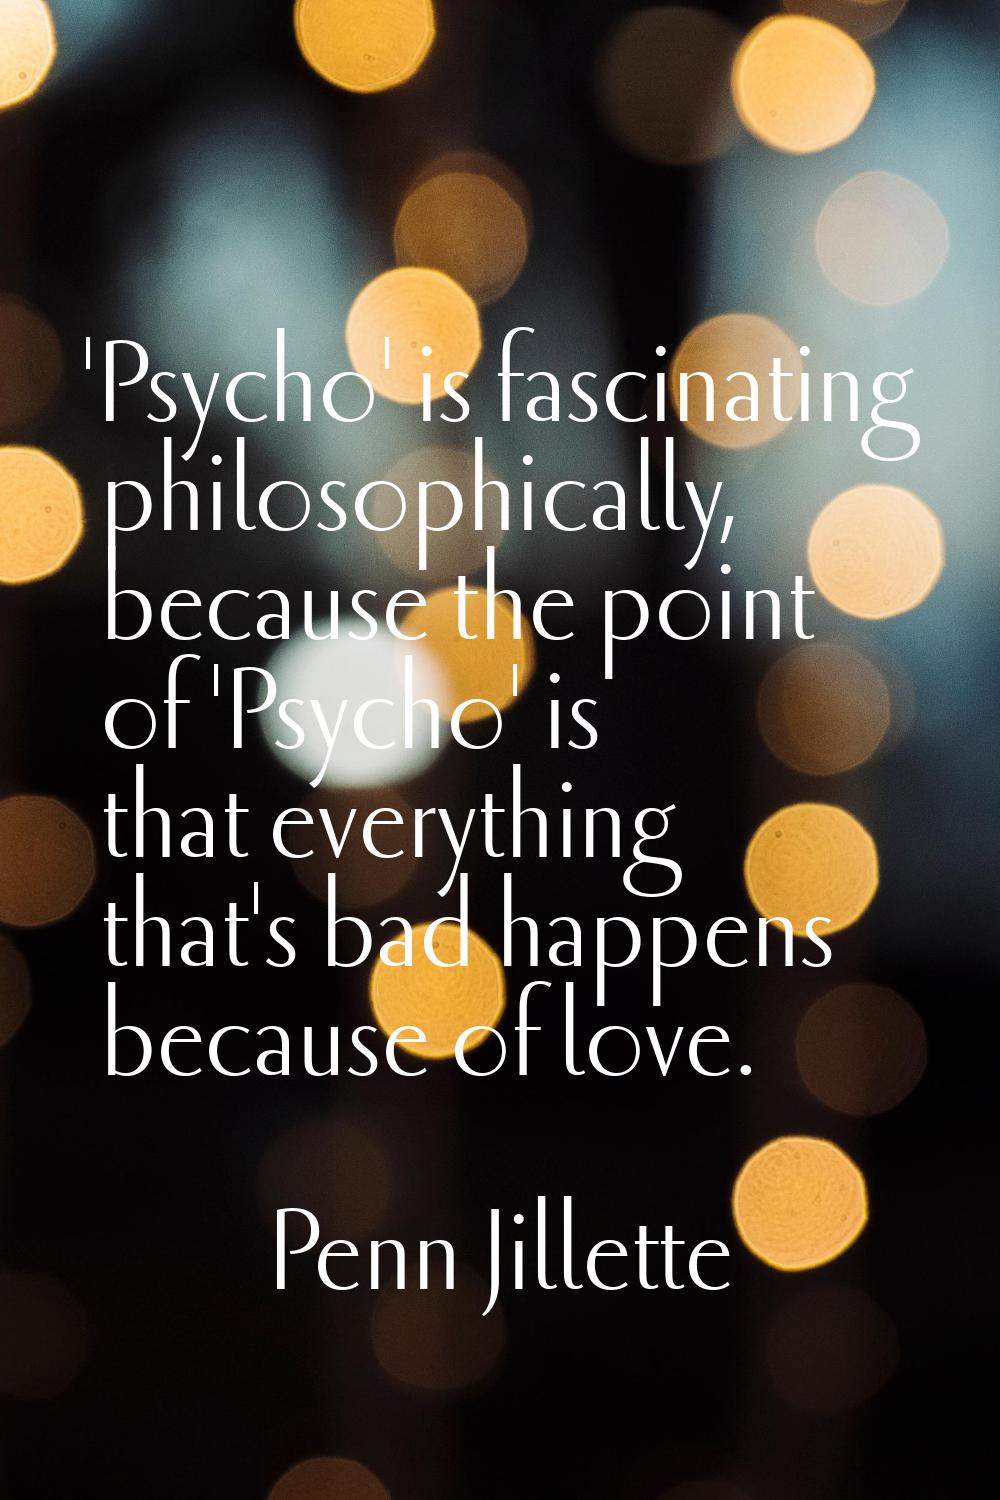 'Psycho' is fascinating philosophically, because the point of 'Psycho' is that everything that's ba